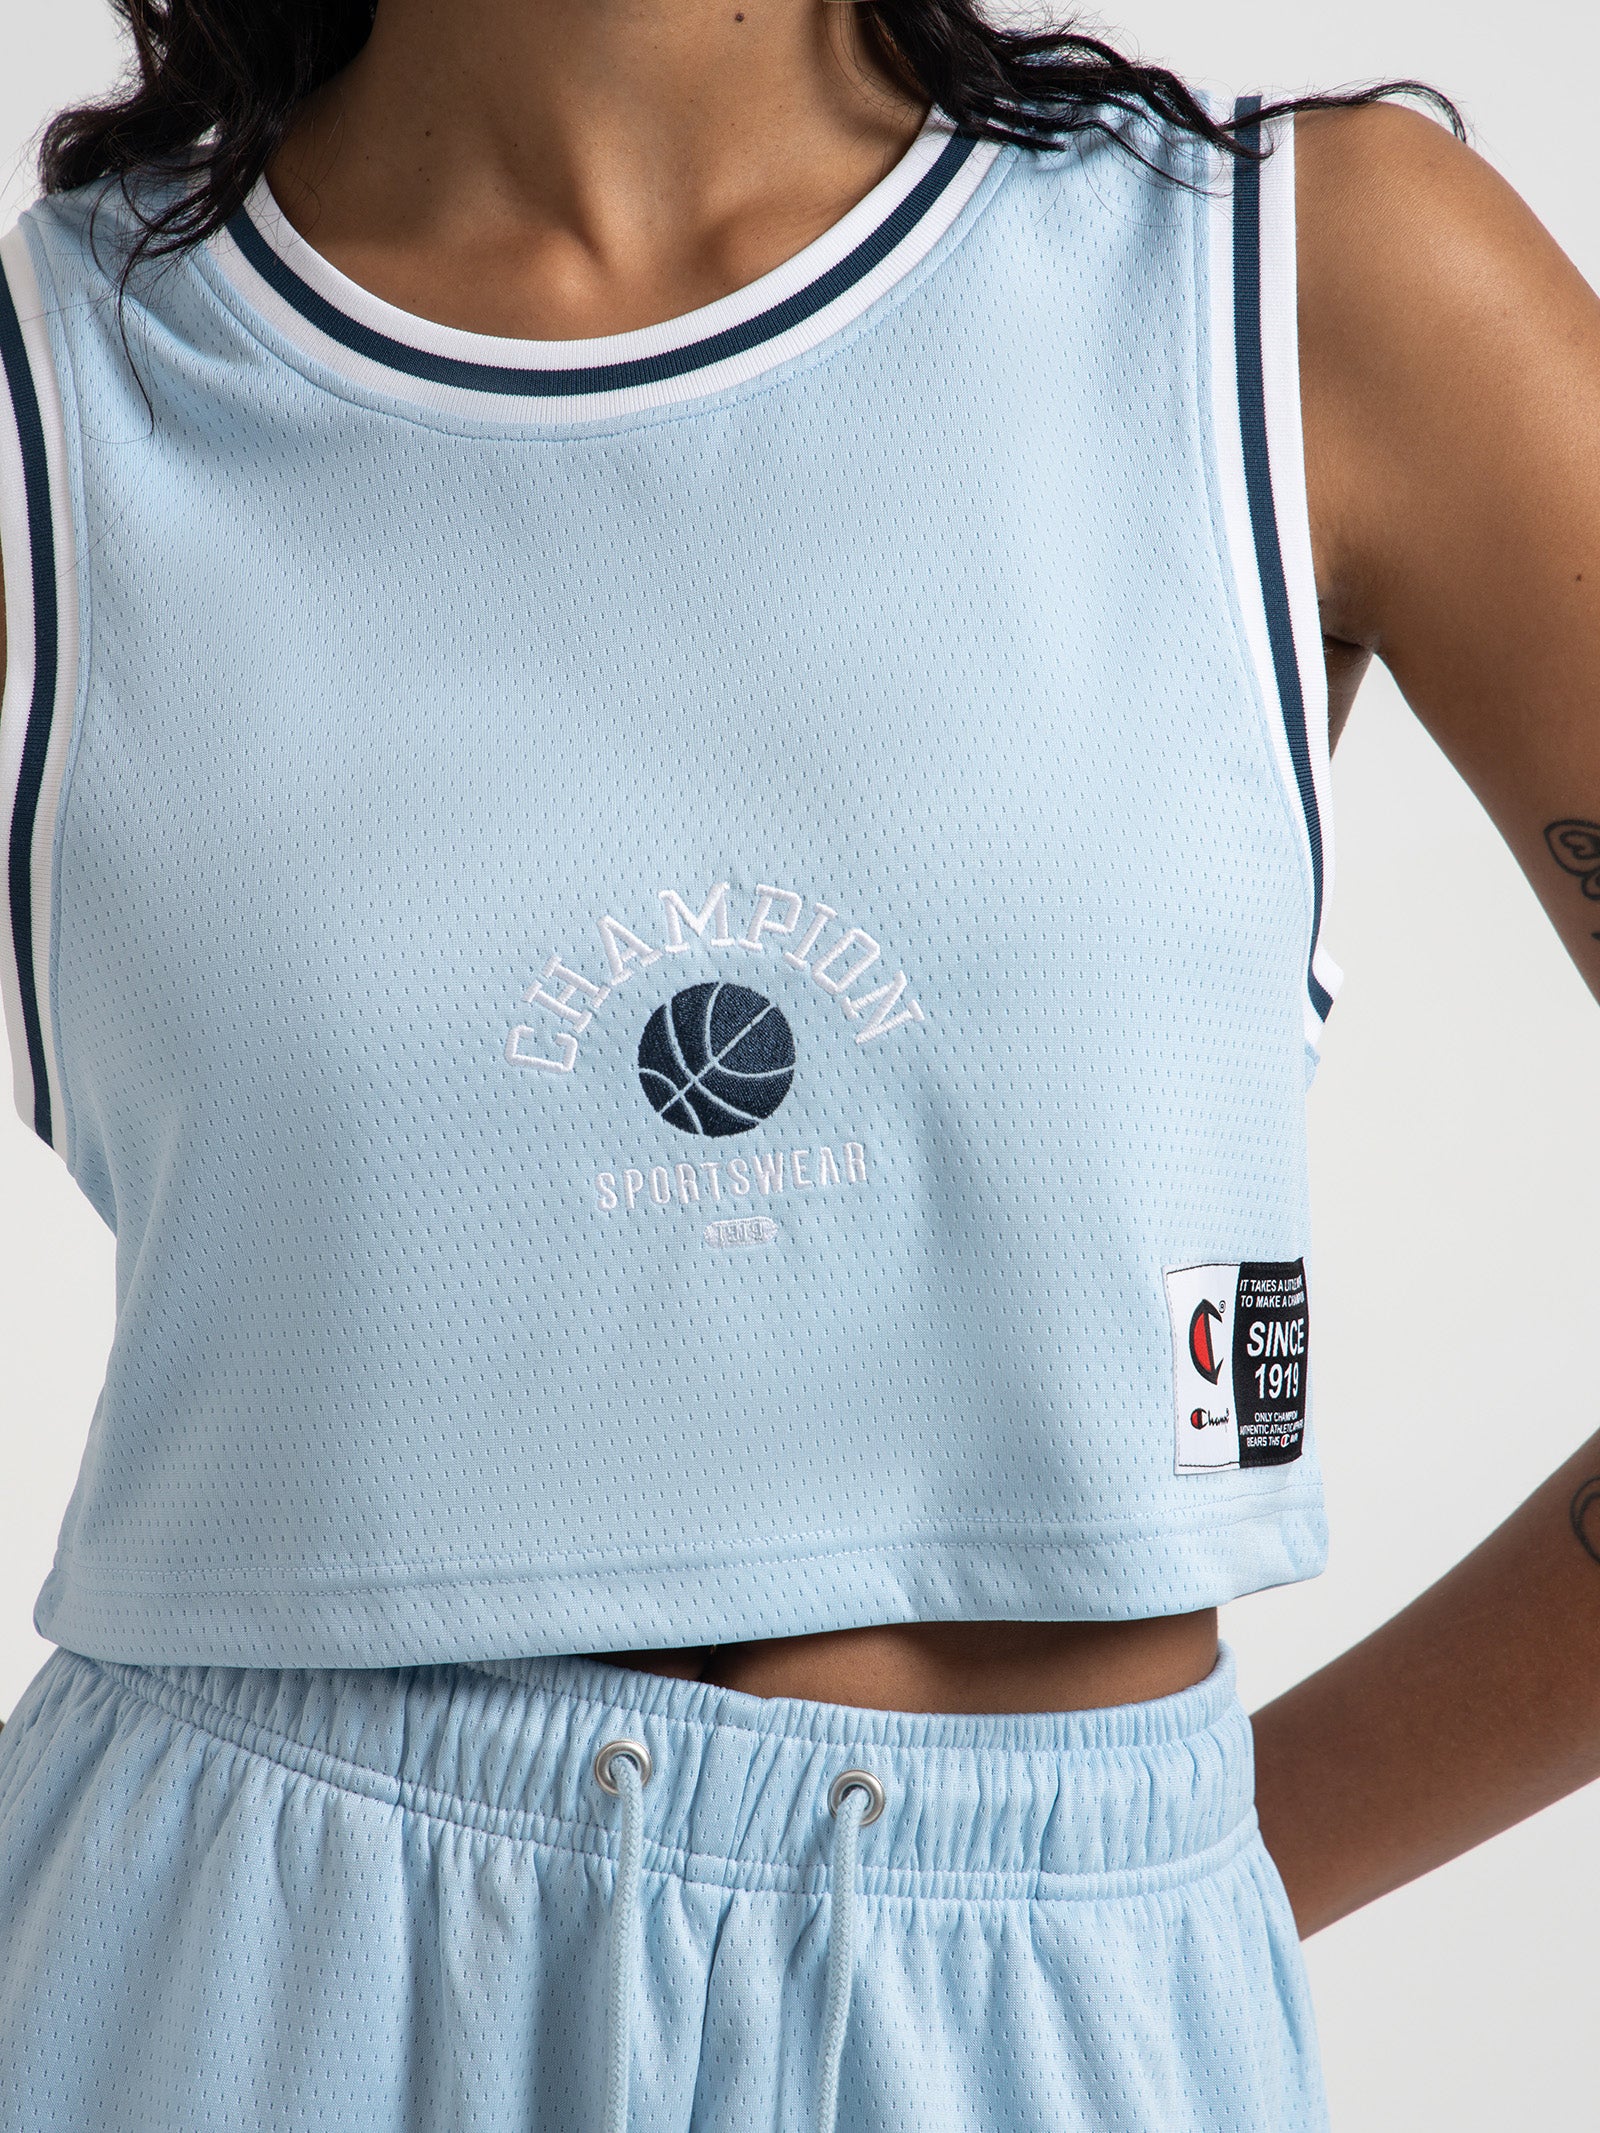 Lifestyle Clubhouse Basketball Crop Jersey in Coastline